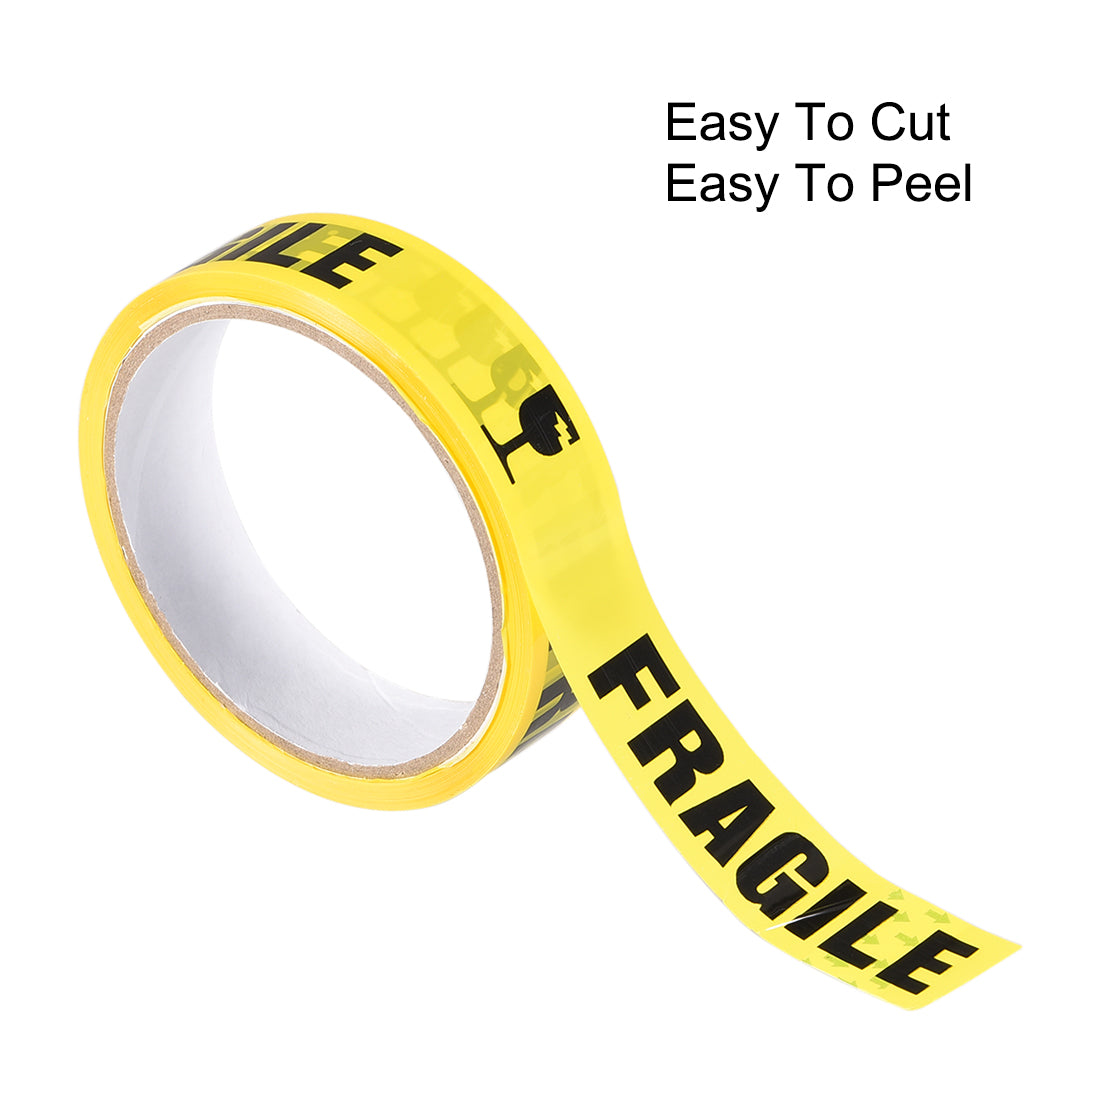 uxcell Uxcell Caution Warning Stripe Sticker Adhesive Tape FRAGILE Marking, 82 Ft x 1 Inch(LxW), Yellow Black for Workplace Wet Floor Caution